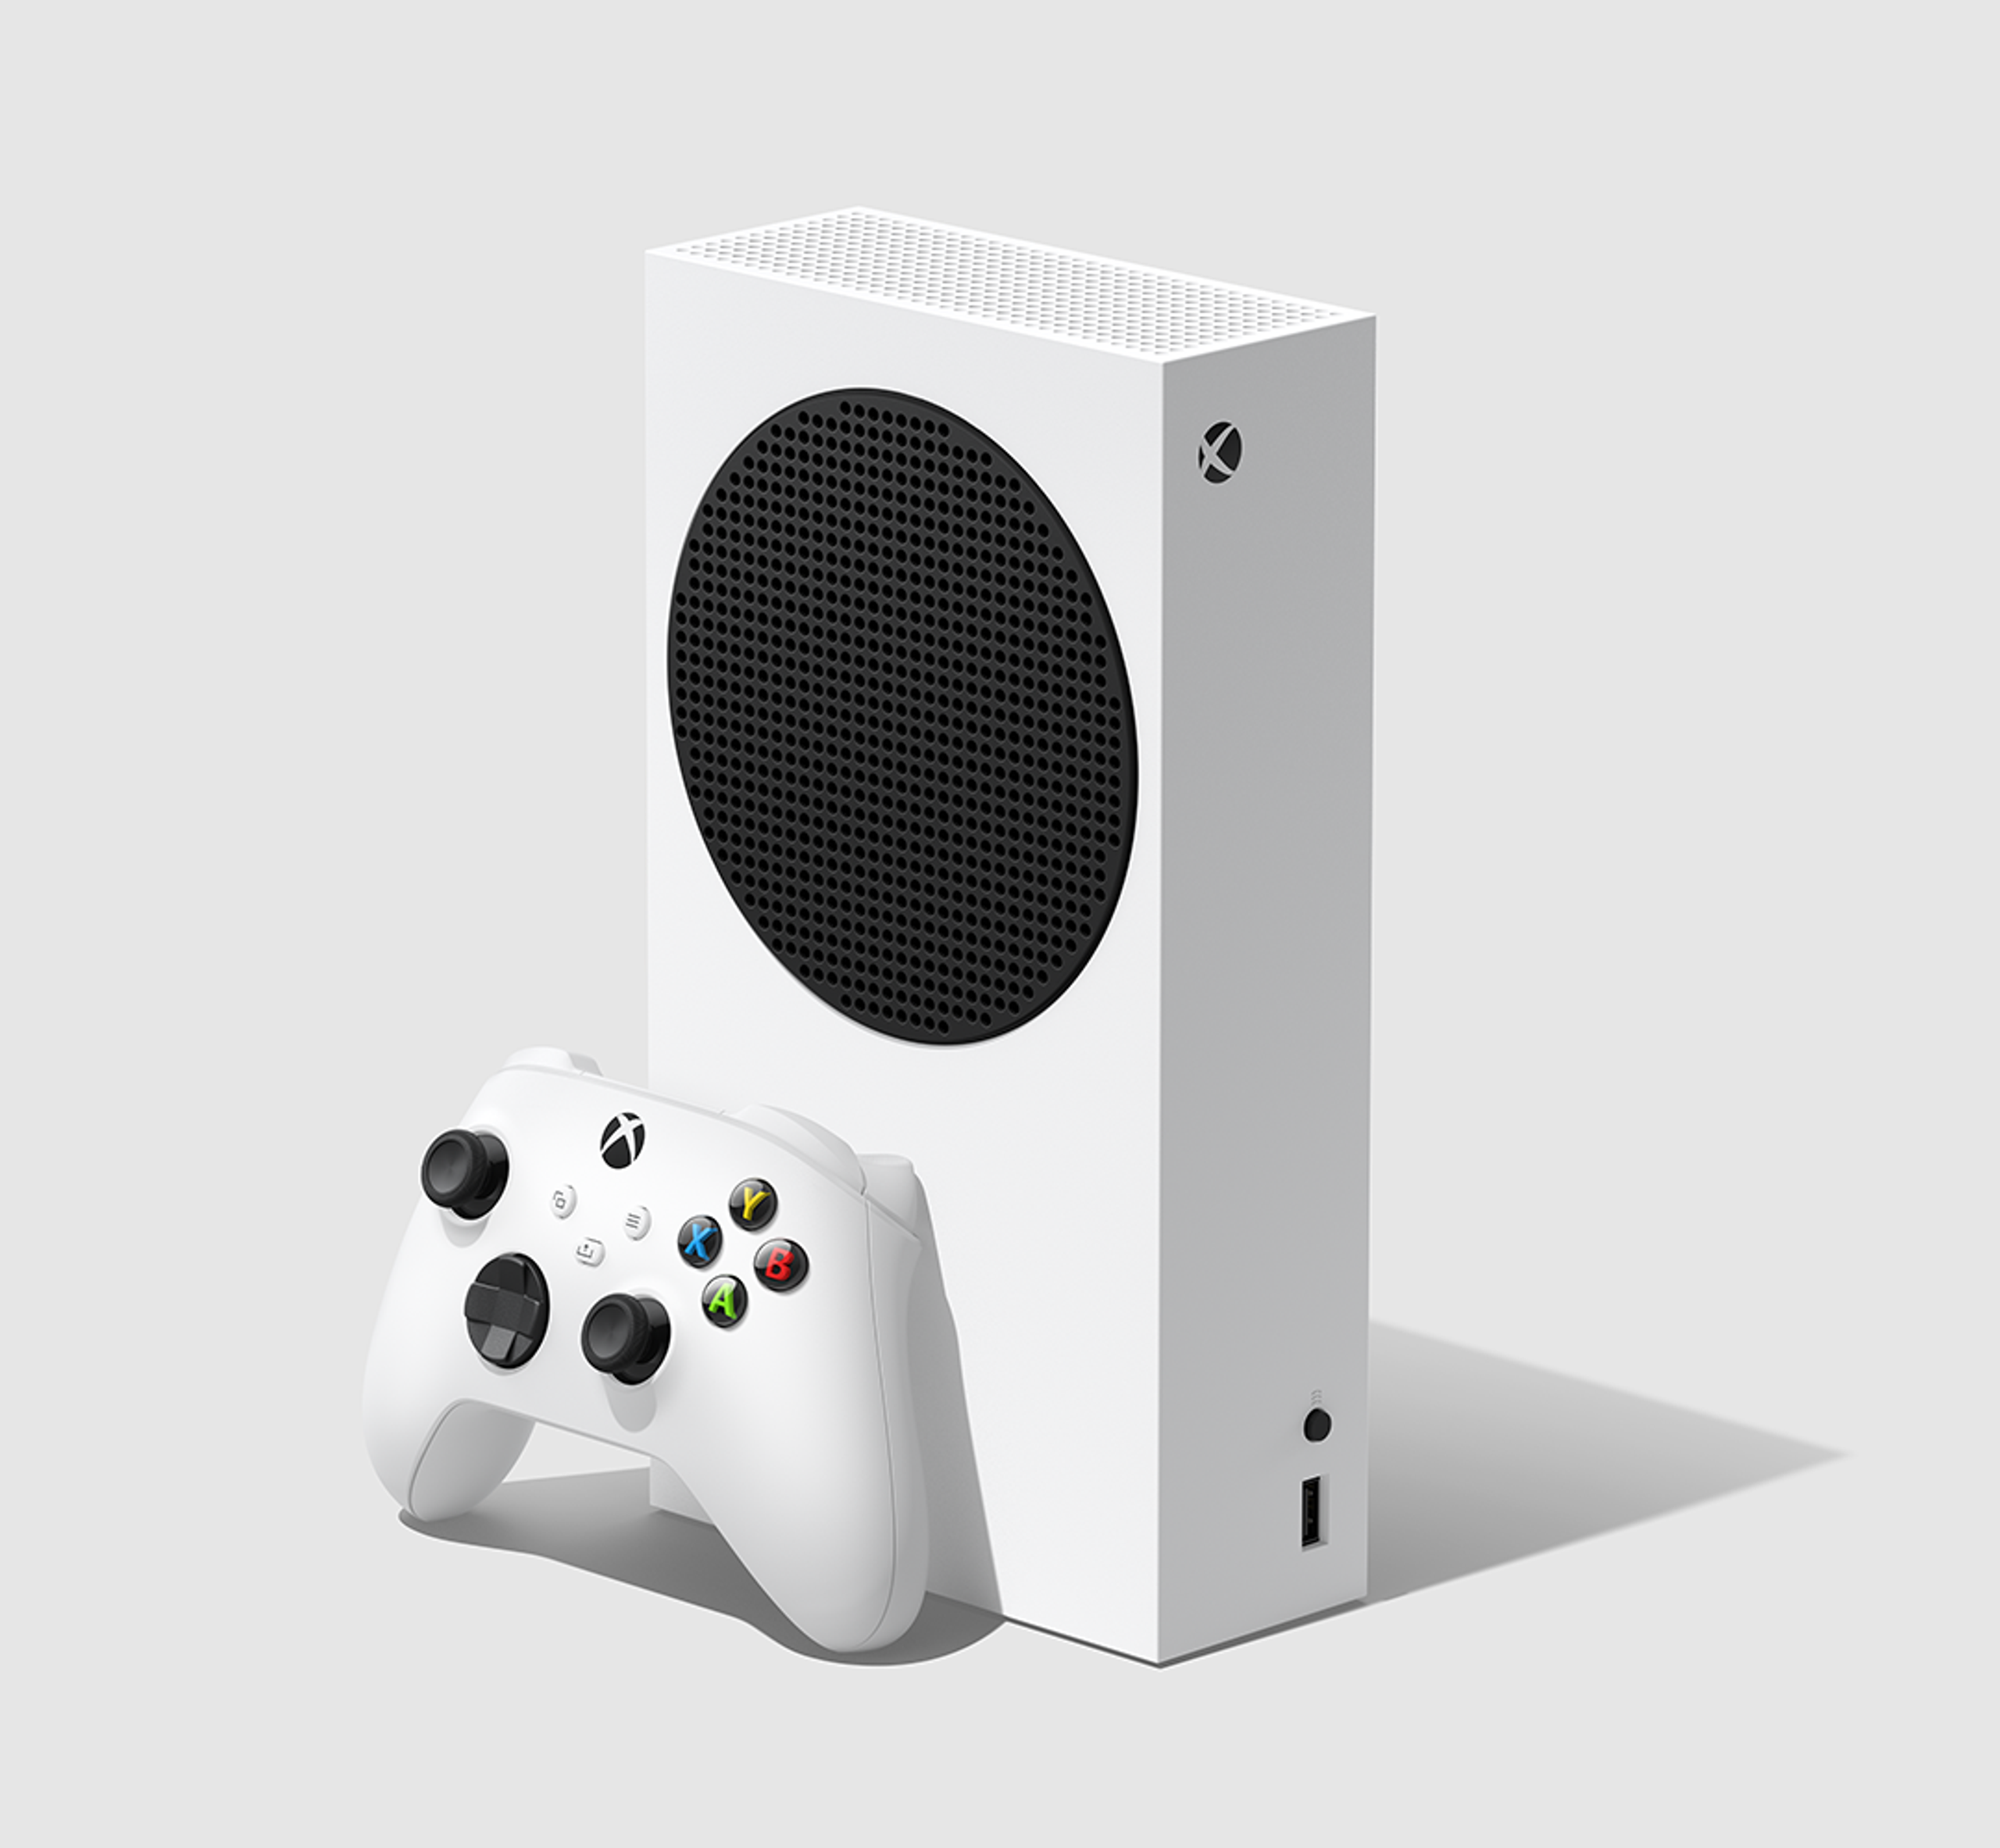 Microsoft's Xbox Series S console ($299), is smaller than the new Xbox Series X console and ditches the Blu-ray disc drive.